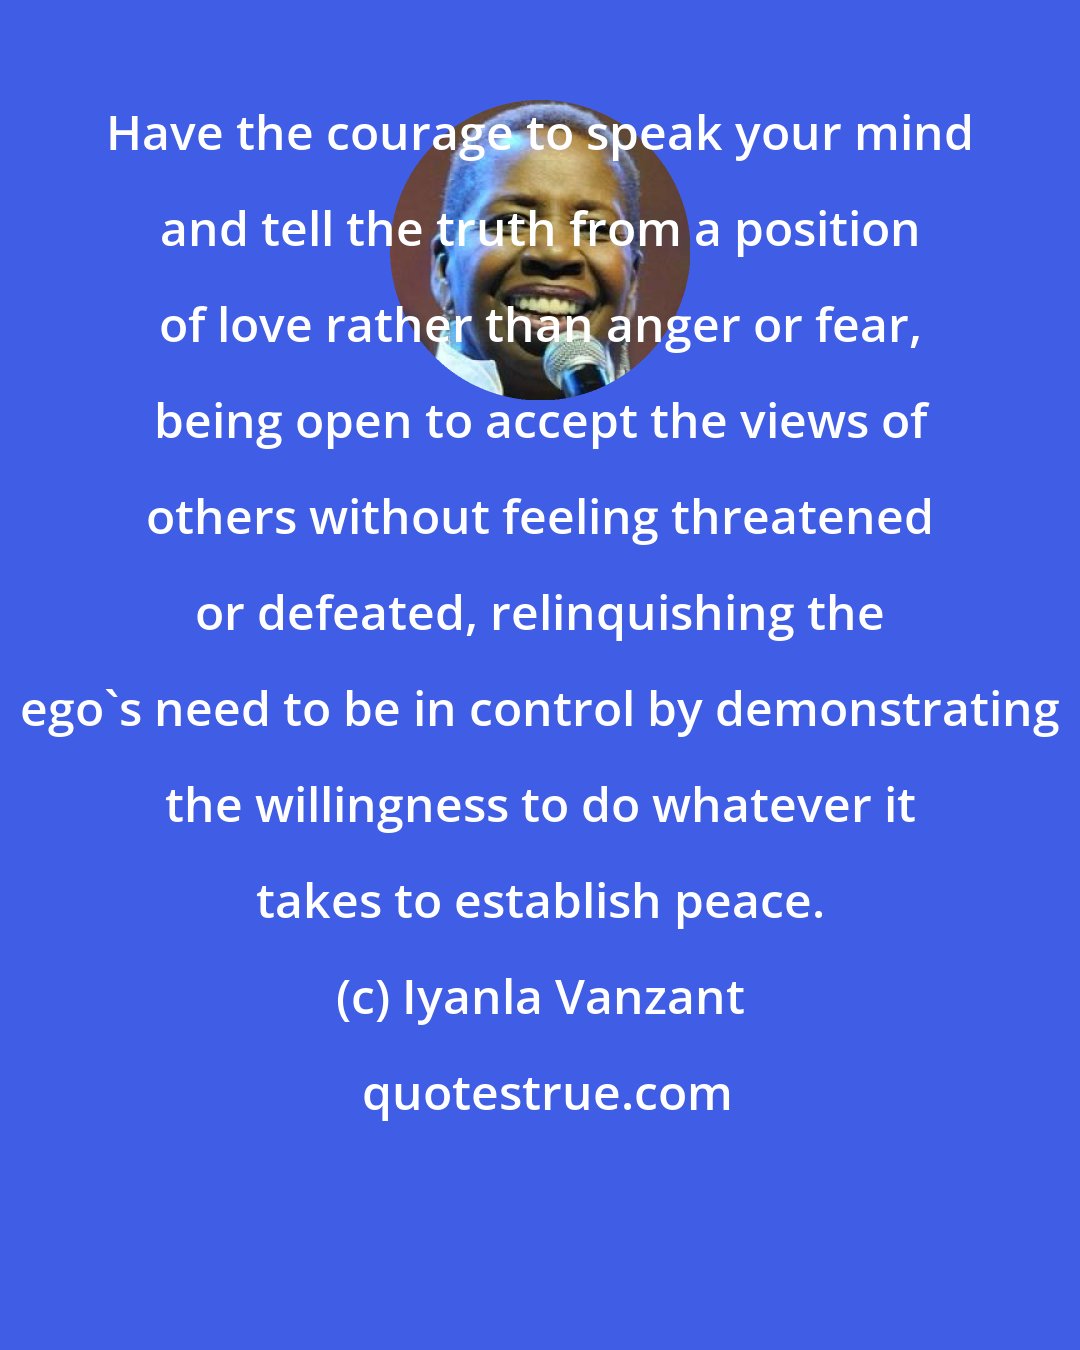 Iyanla Vanzant: Have the courage to speak your mind and tell the truth from a position of love rather than anger or fear, being open to accept the views of others without feeling threatened or defeated, relinquishing the ego's need to be in control by demonstrating the willingness to do whatever it takes to establish peace.